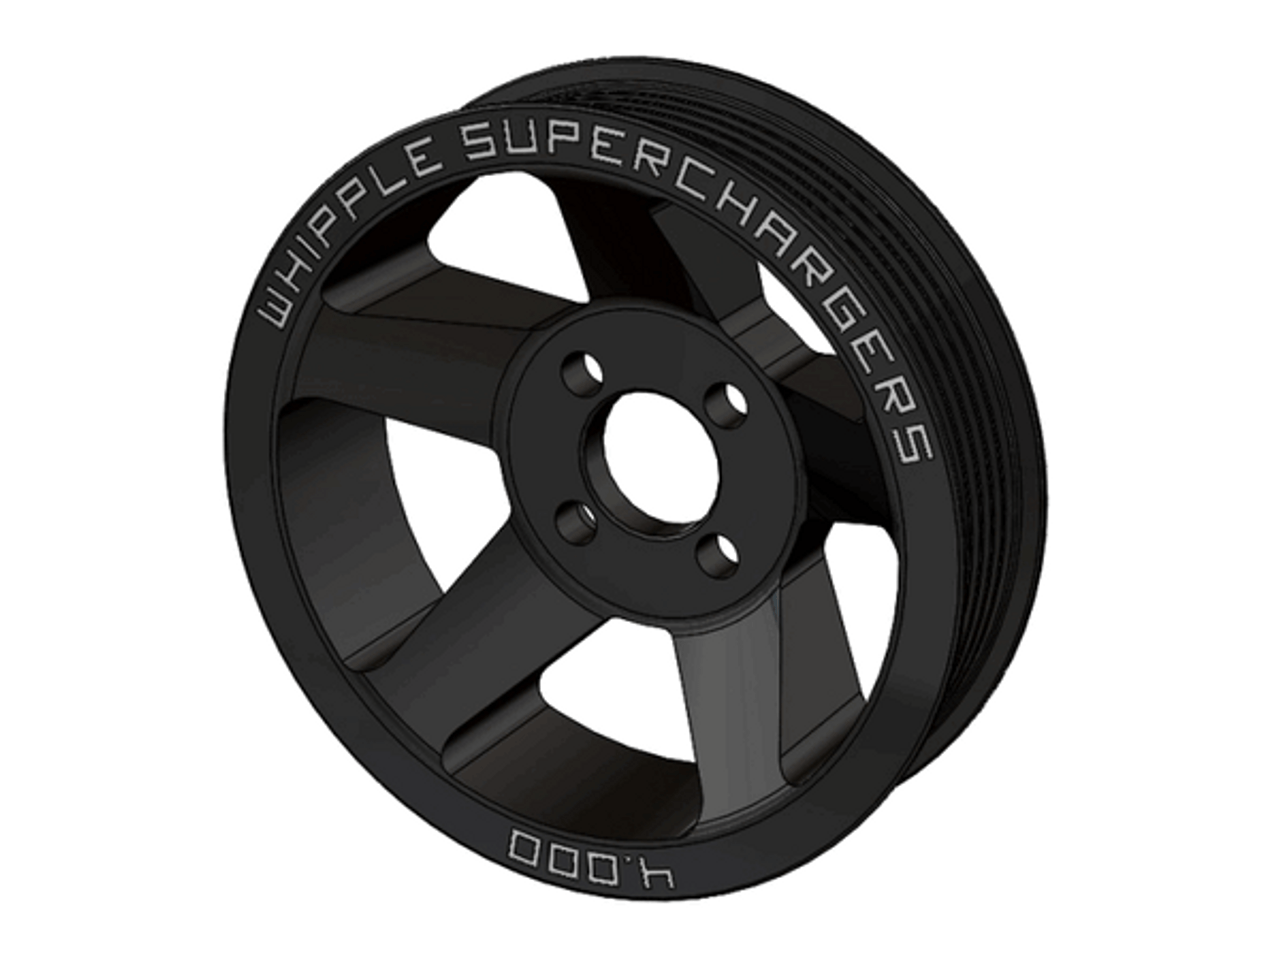 Whipple 10 Rib Supercharger Pulley (GM) SCP-10-GM - Beefcake Racing